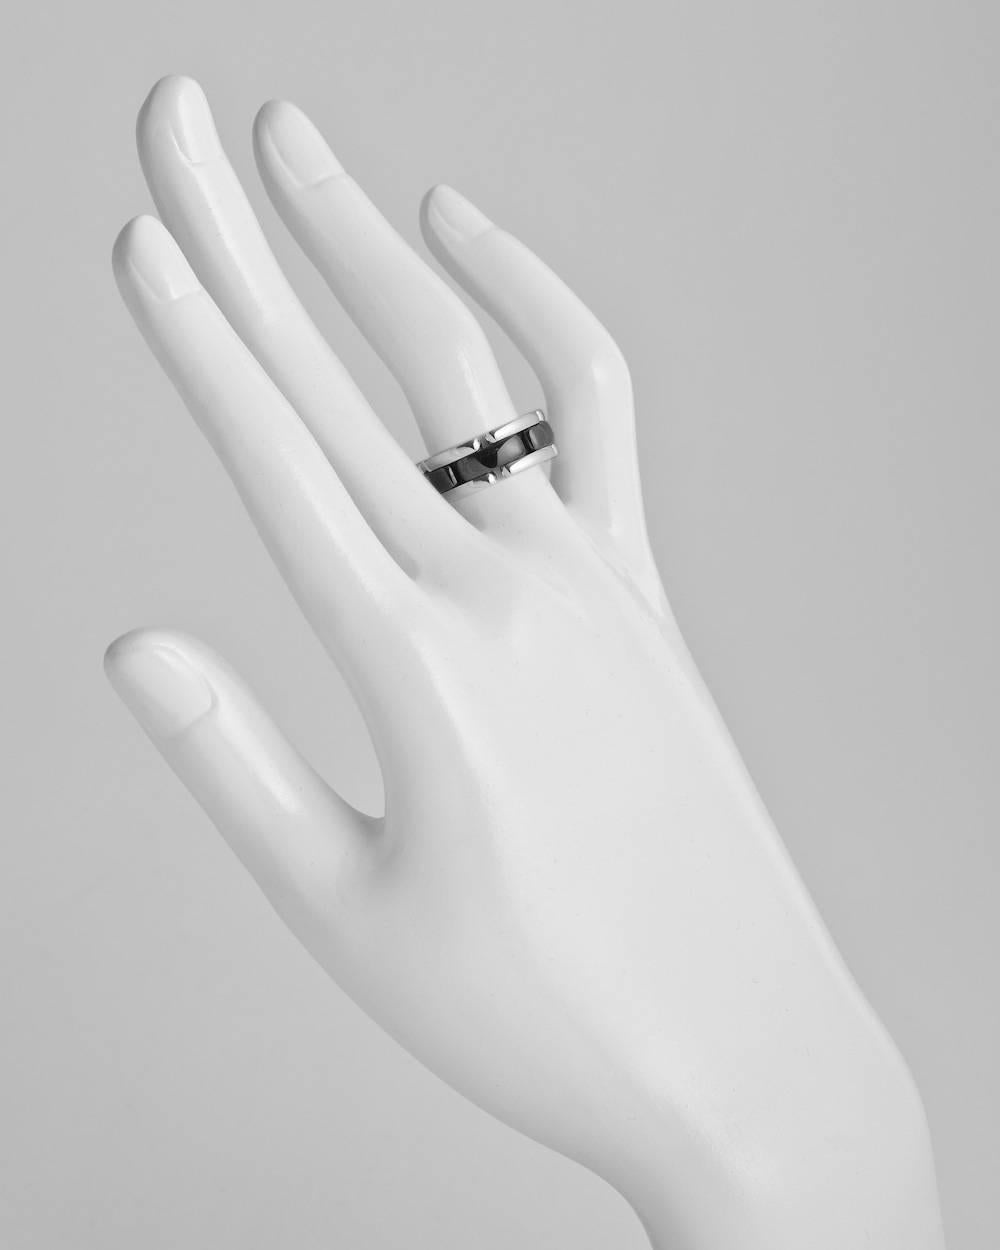 Medium 'Ultra' band ring, composed of black ceramic central links flanked by 18k white gold links, numbered 20R00908, signed Chanel. Ring size 4 (European size 47). 

$2,200 current approximate retail
